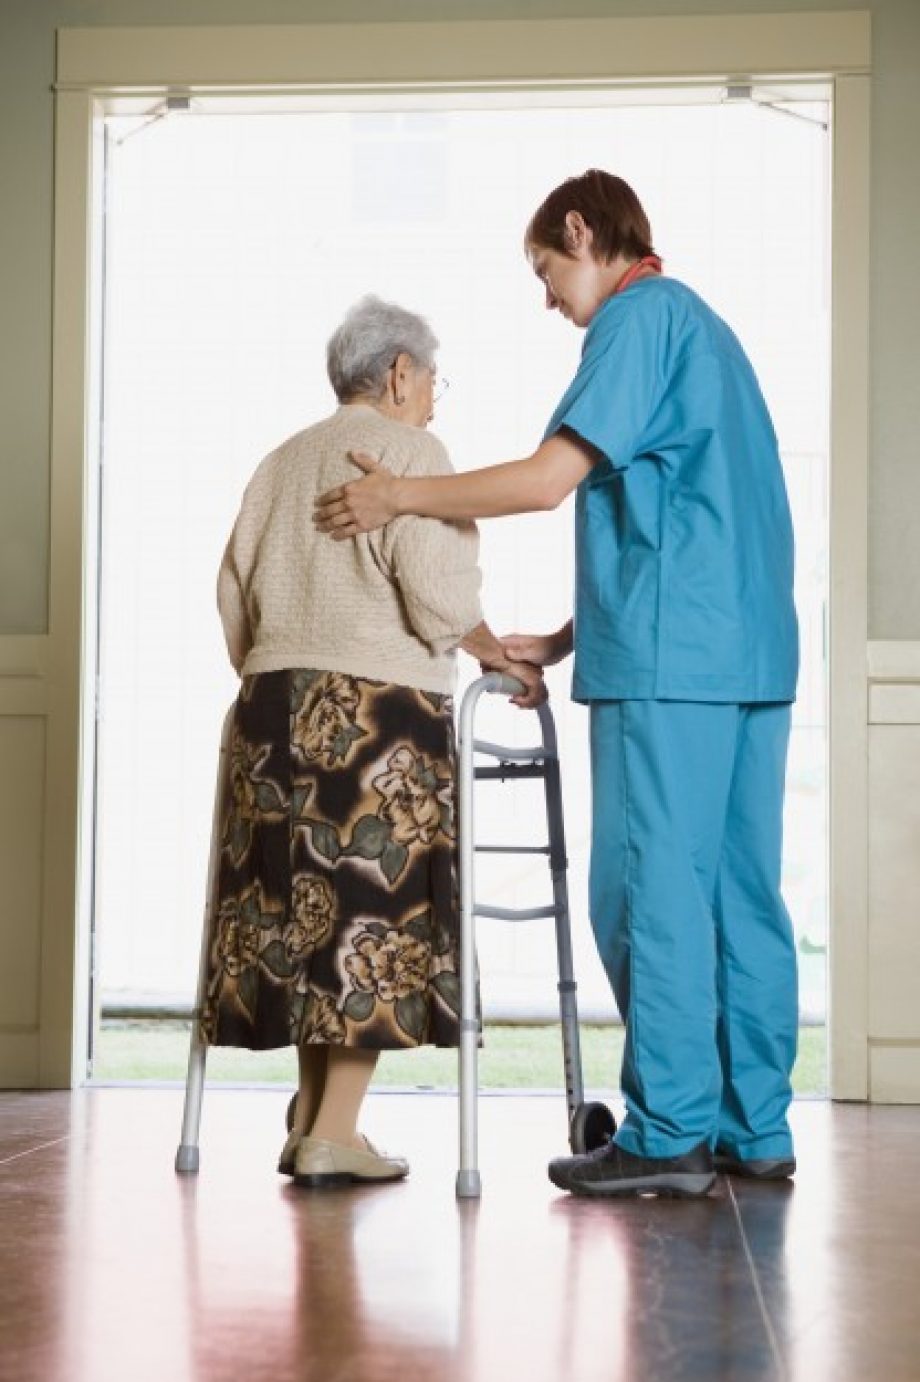 Elderly woman and care provider